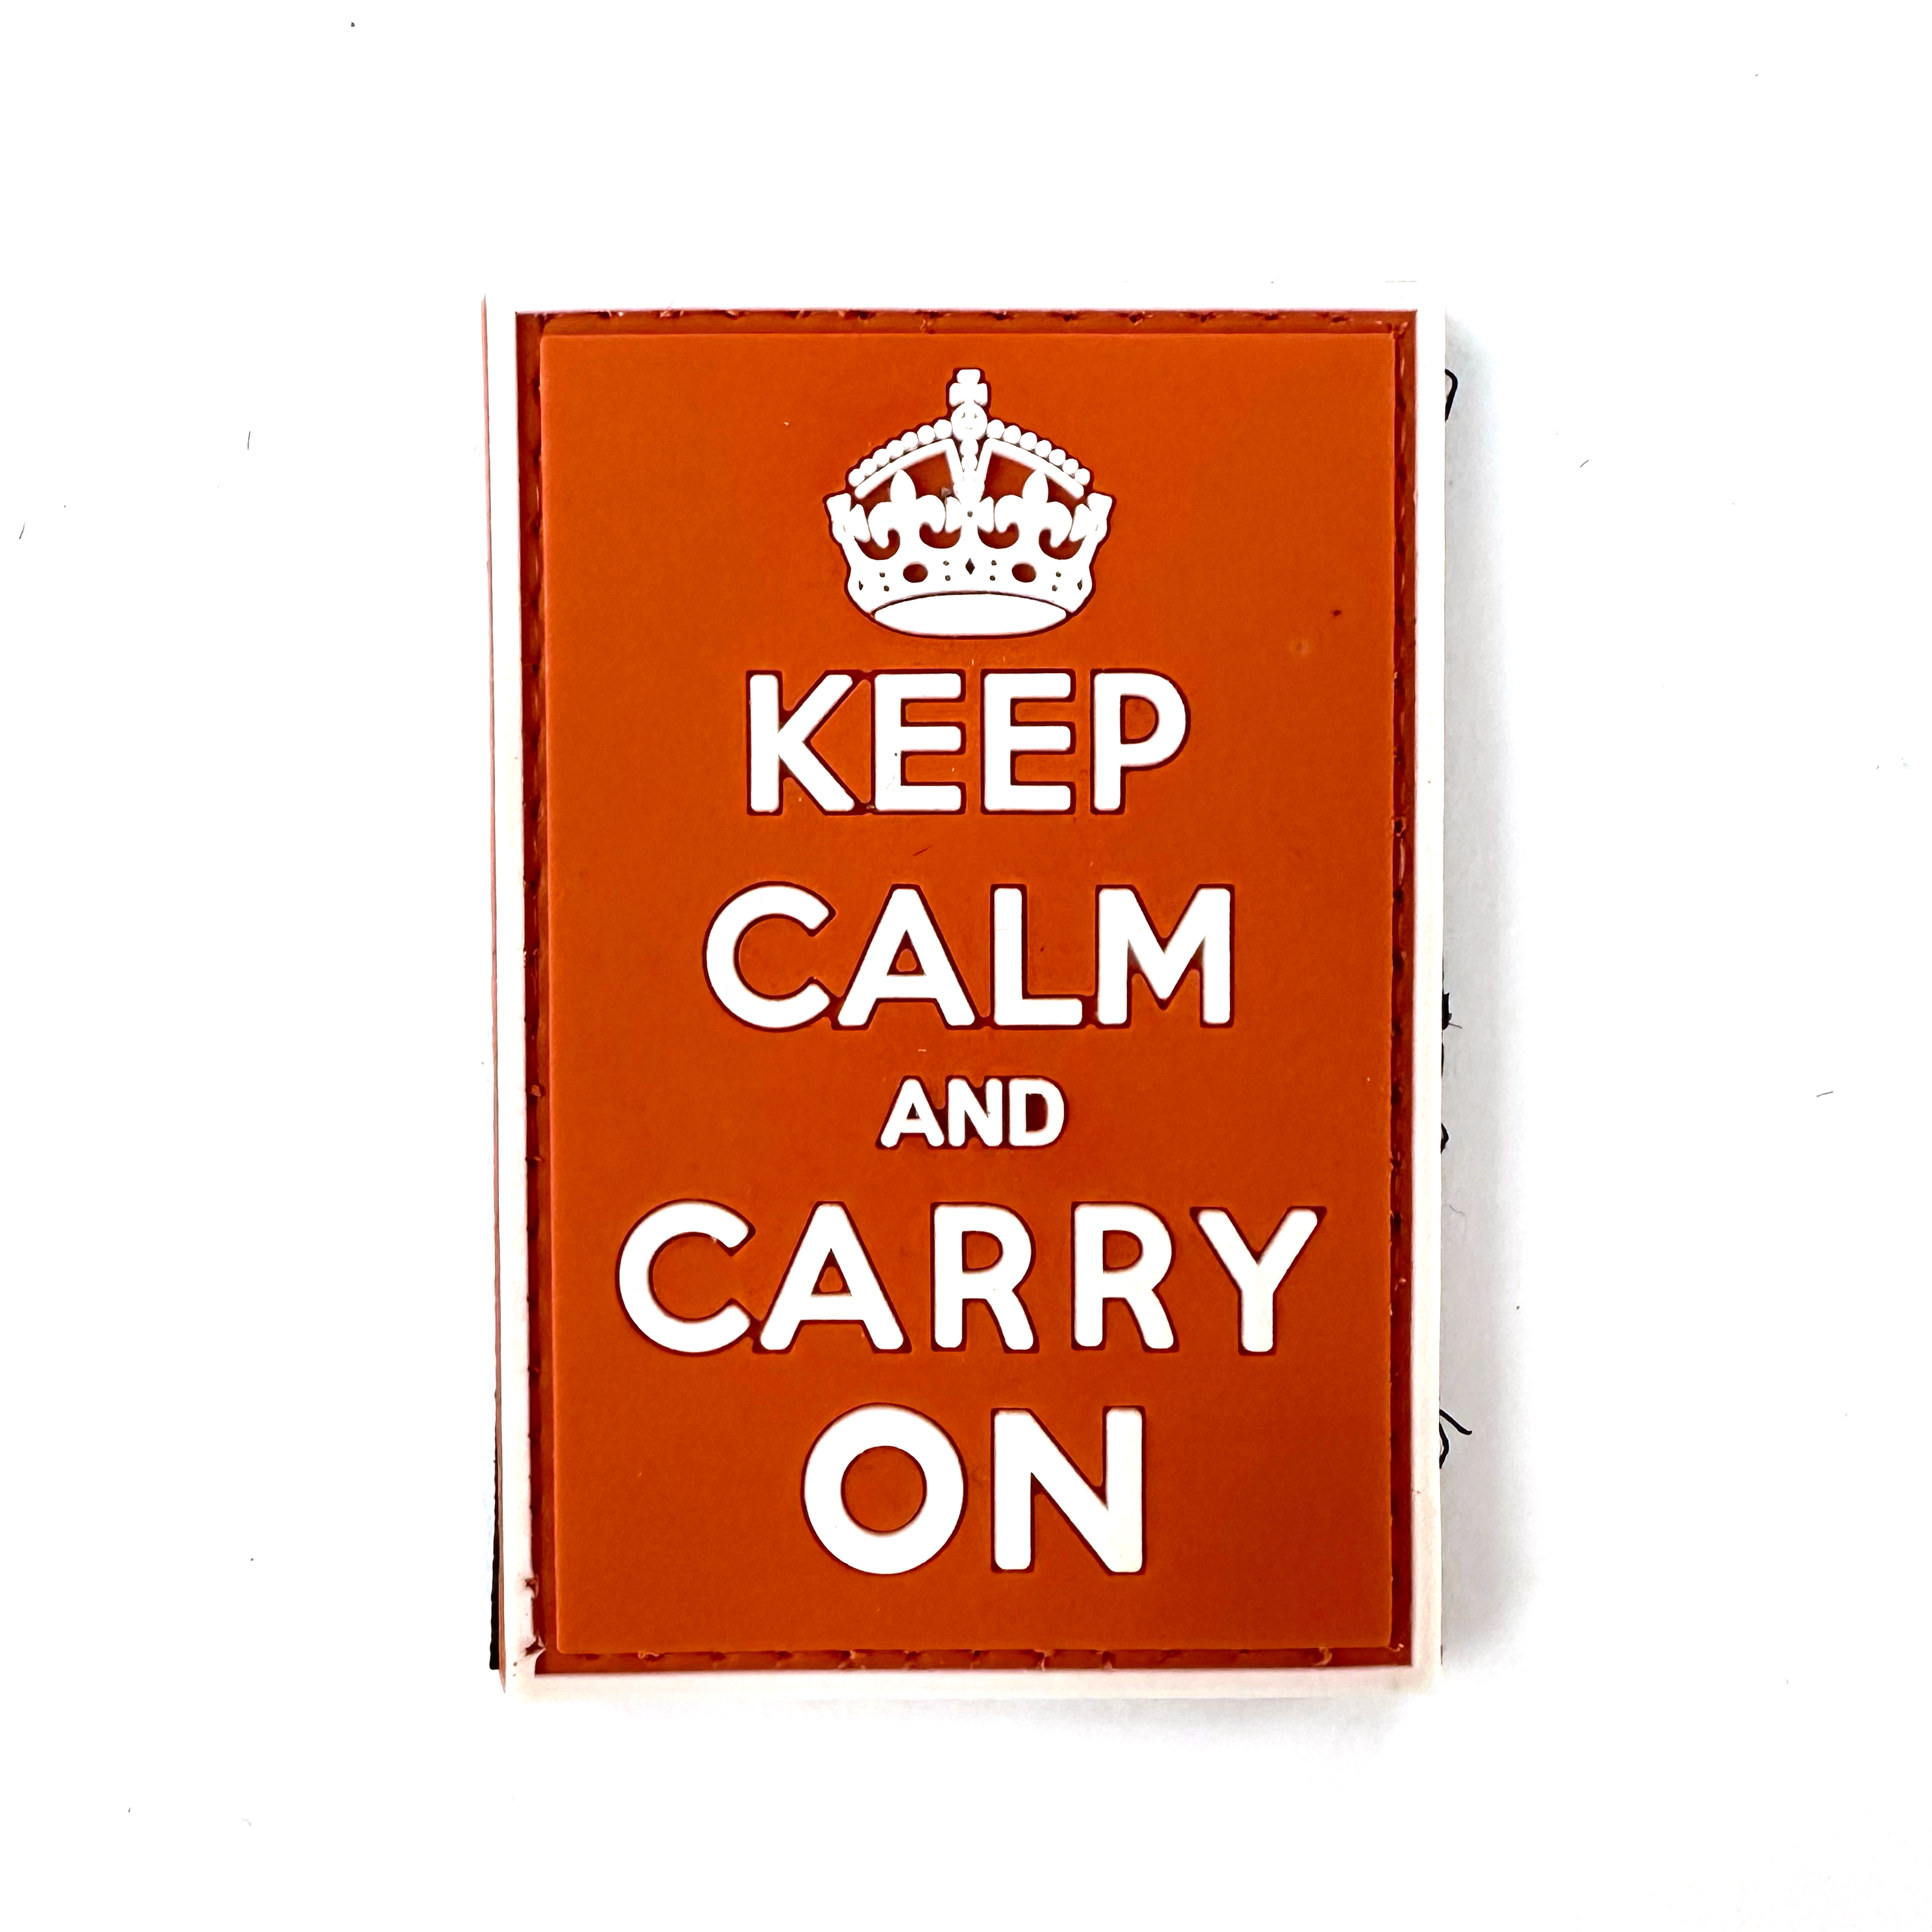 PVC Velcro Patch -  Keep Calm and Carry On - Orange - RPI Supplies